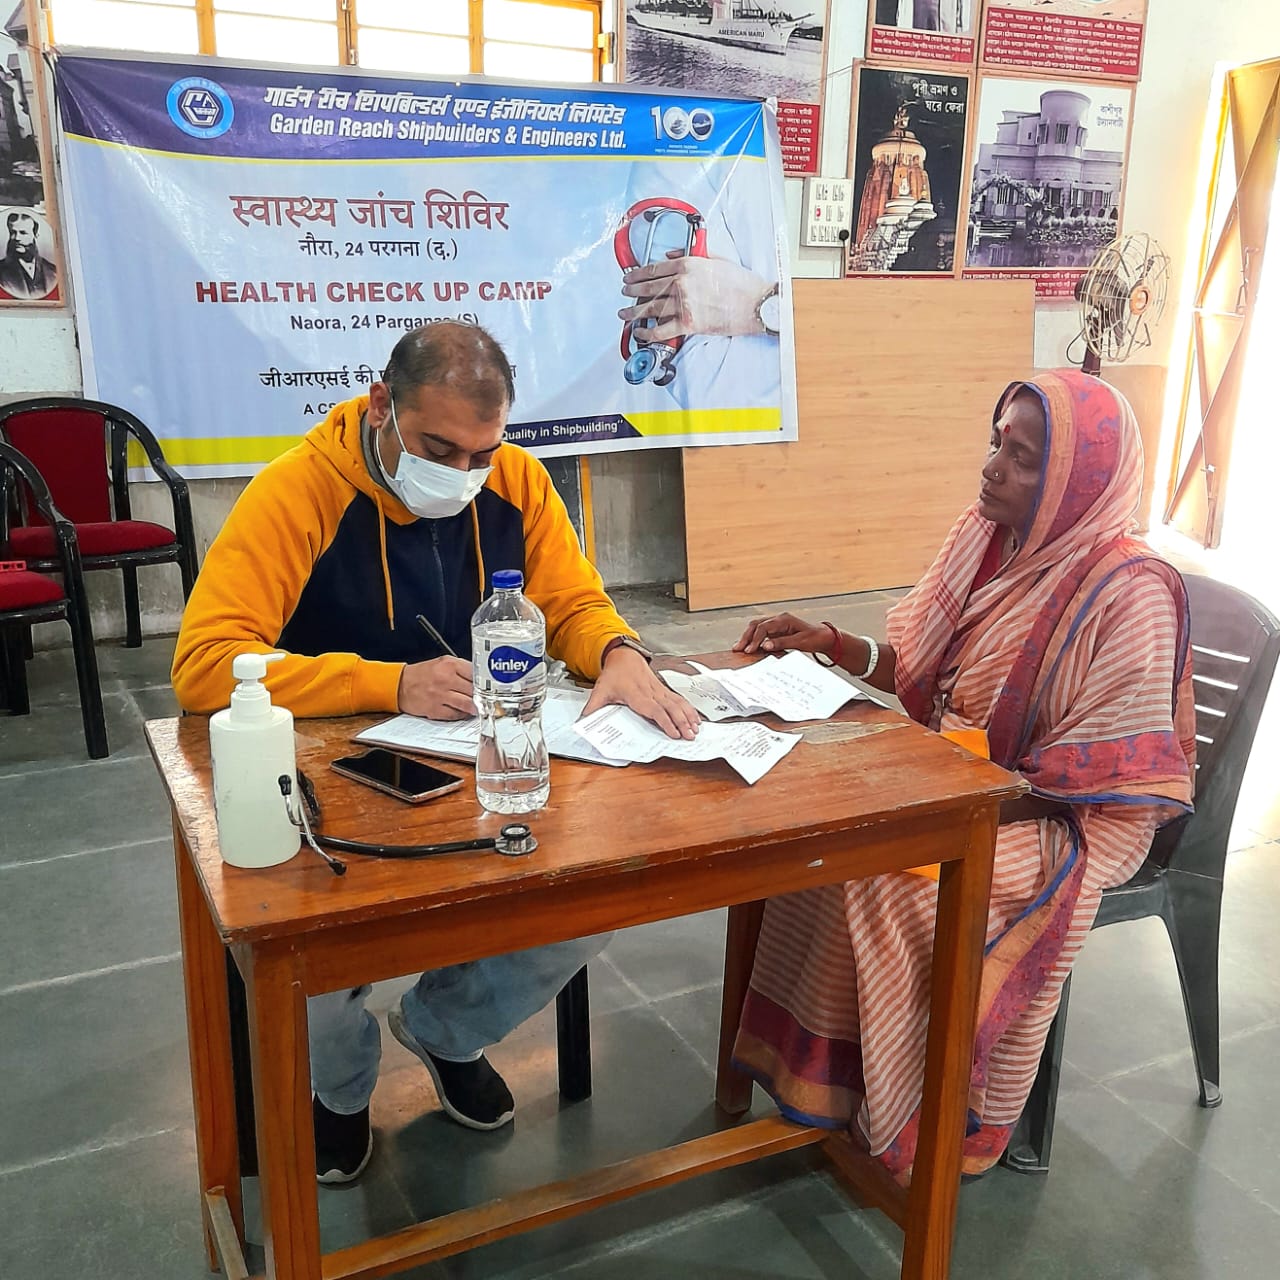 Health Check-Up Camp by GRSE at NAORA, 24 PGS (S) on 04 Jan 24